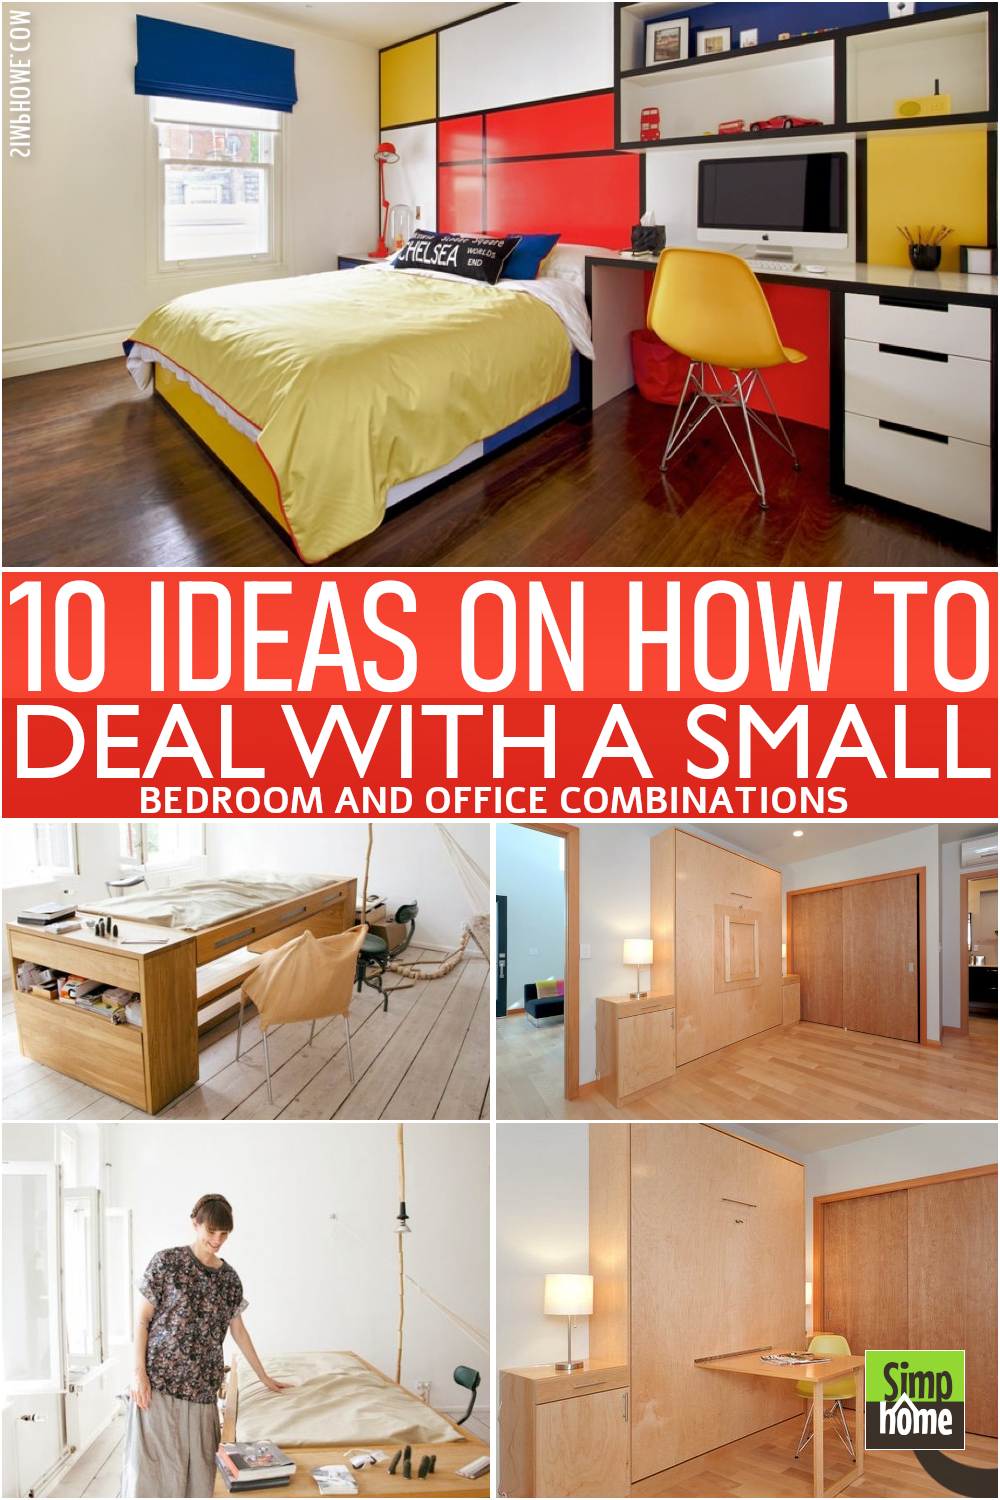 10 Ideas on How to Deal With a Small Bedroom And Office Combo via Simphome.com